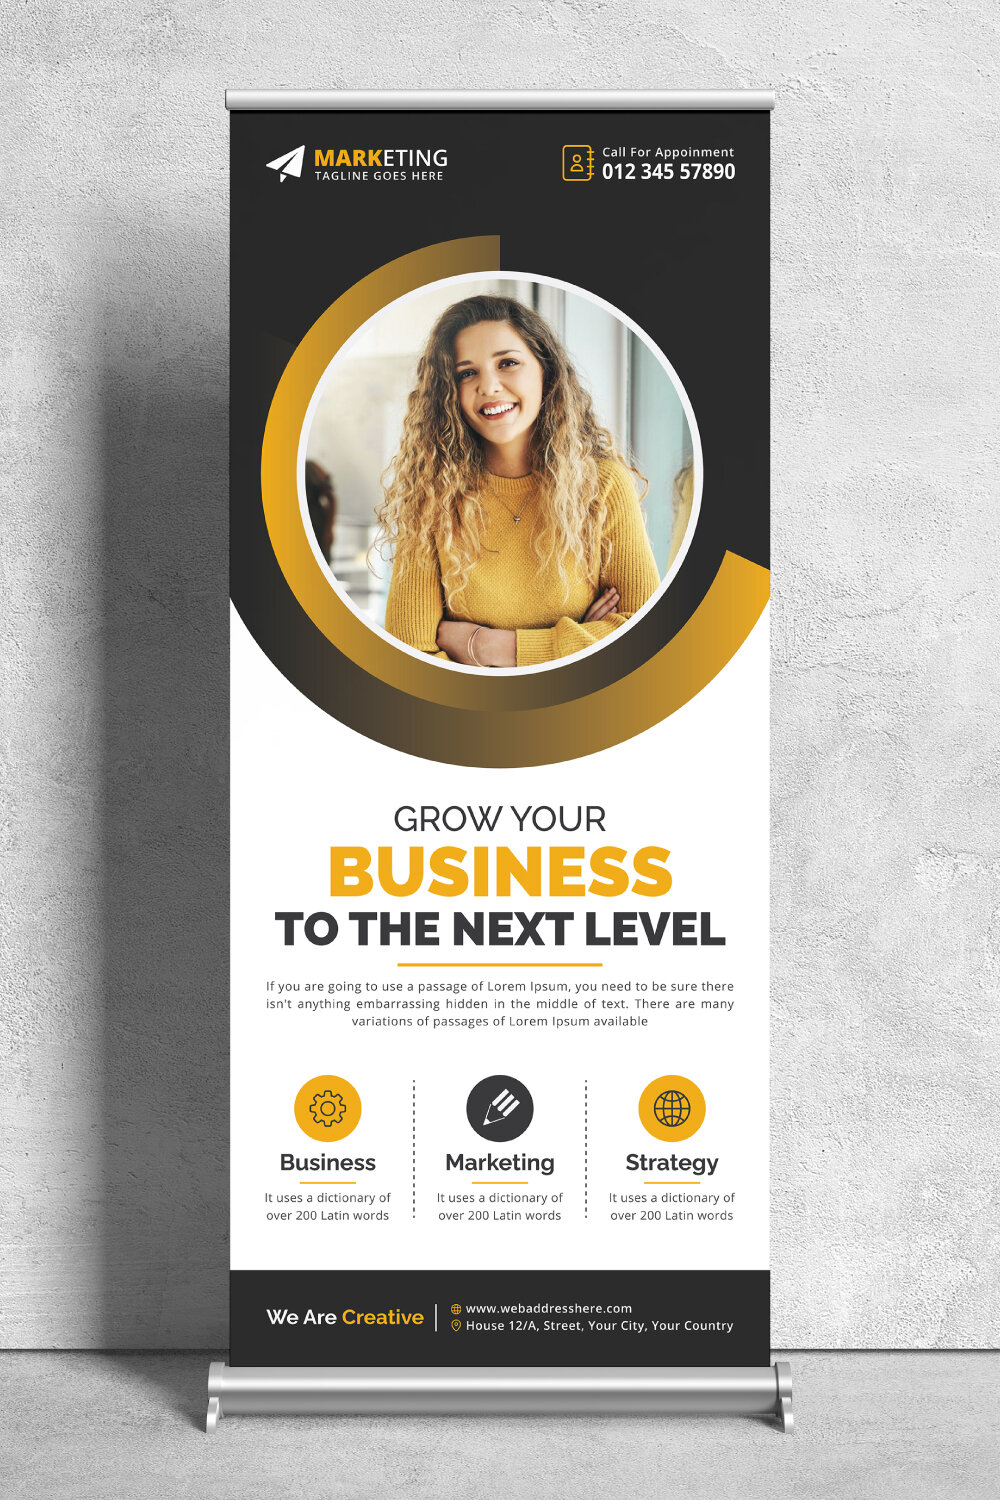 Image of corporate roll up banner in colorful yellow design